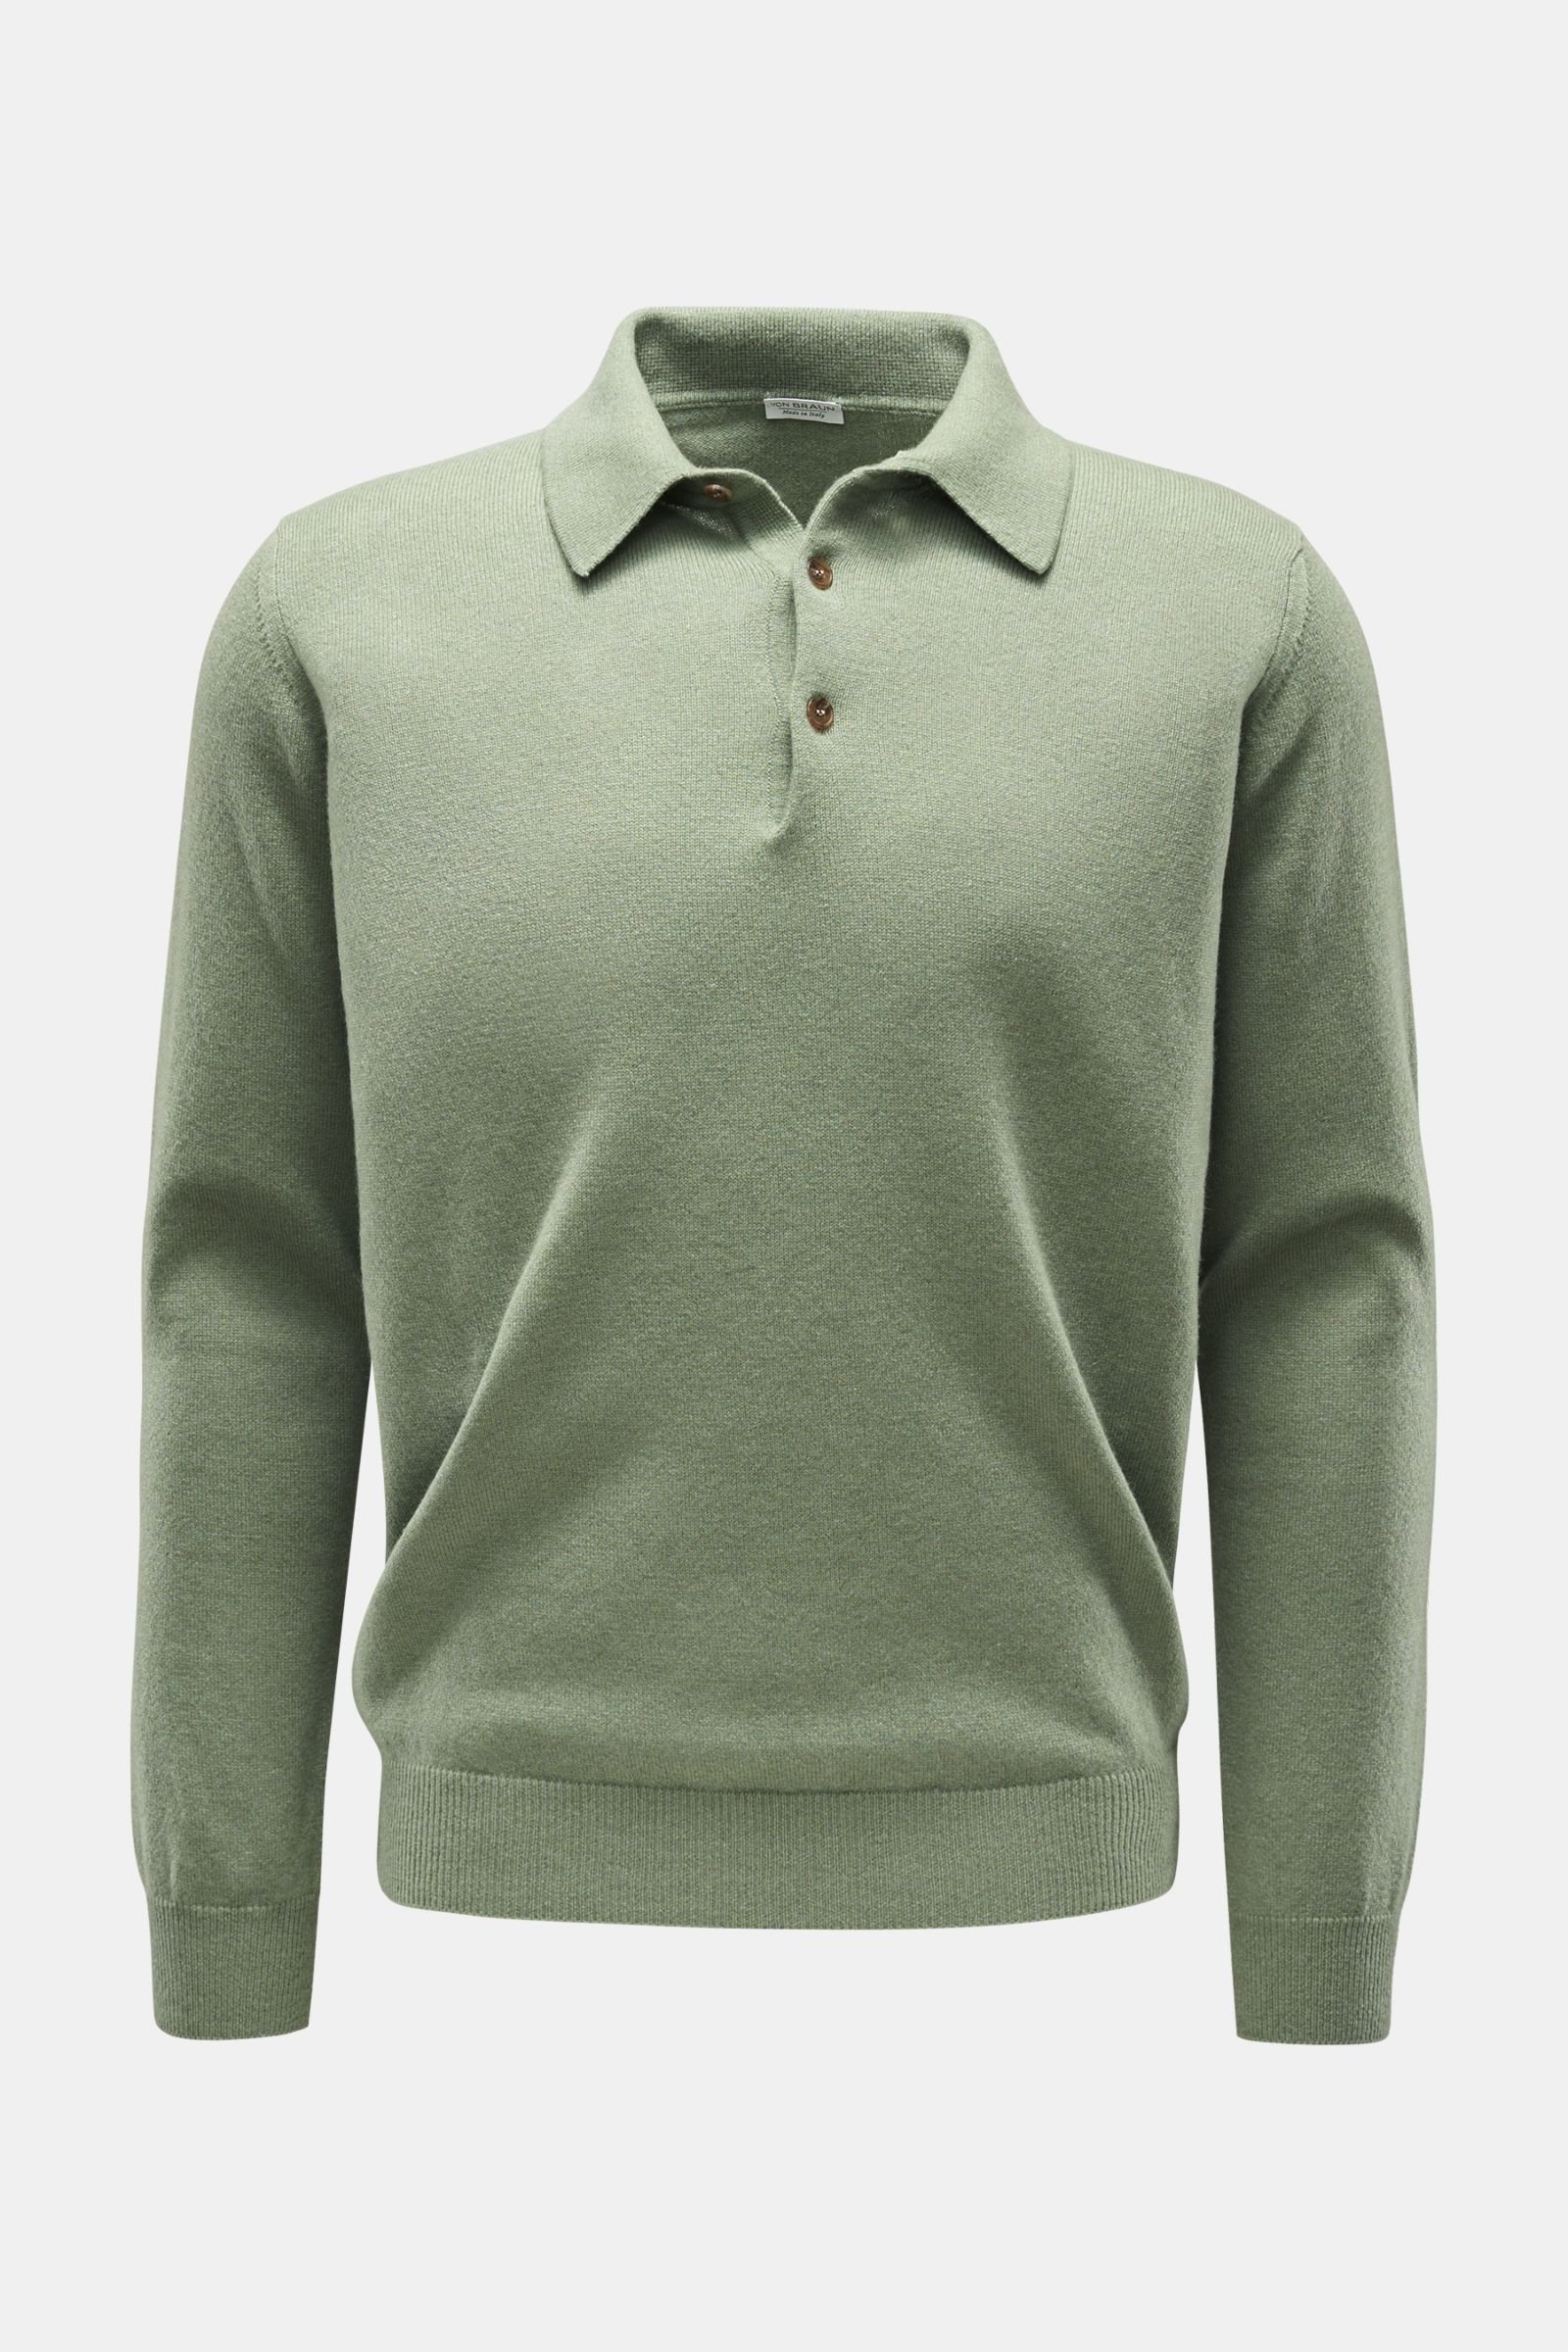 Cashmere knit polo grey-green